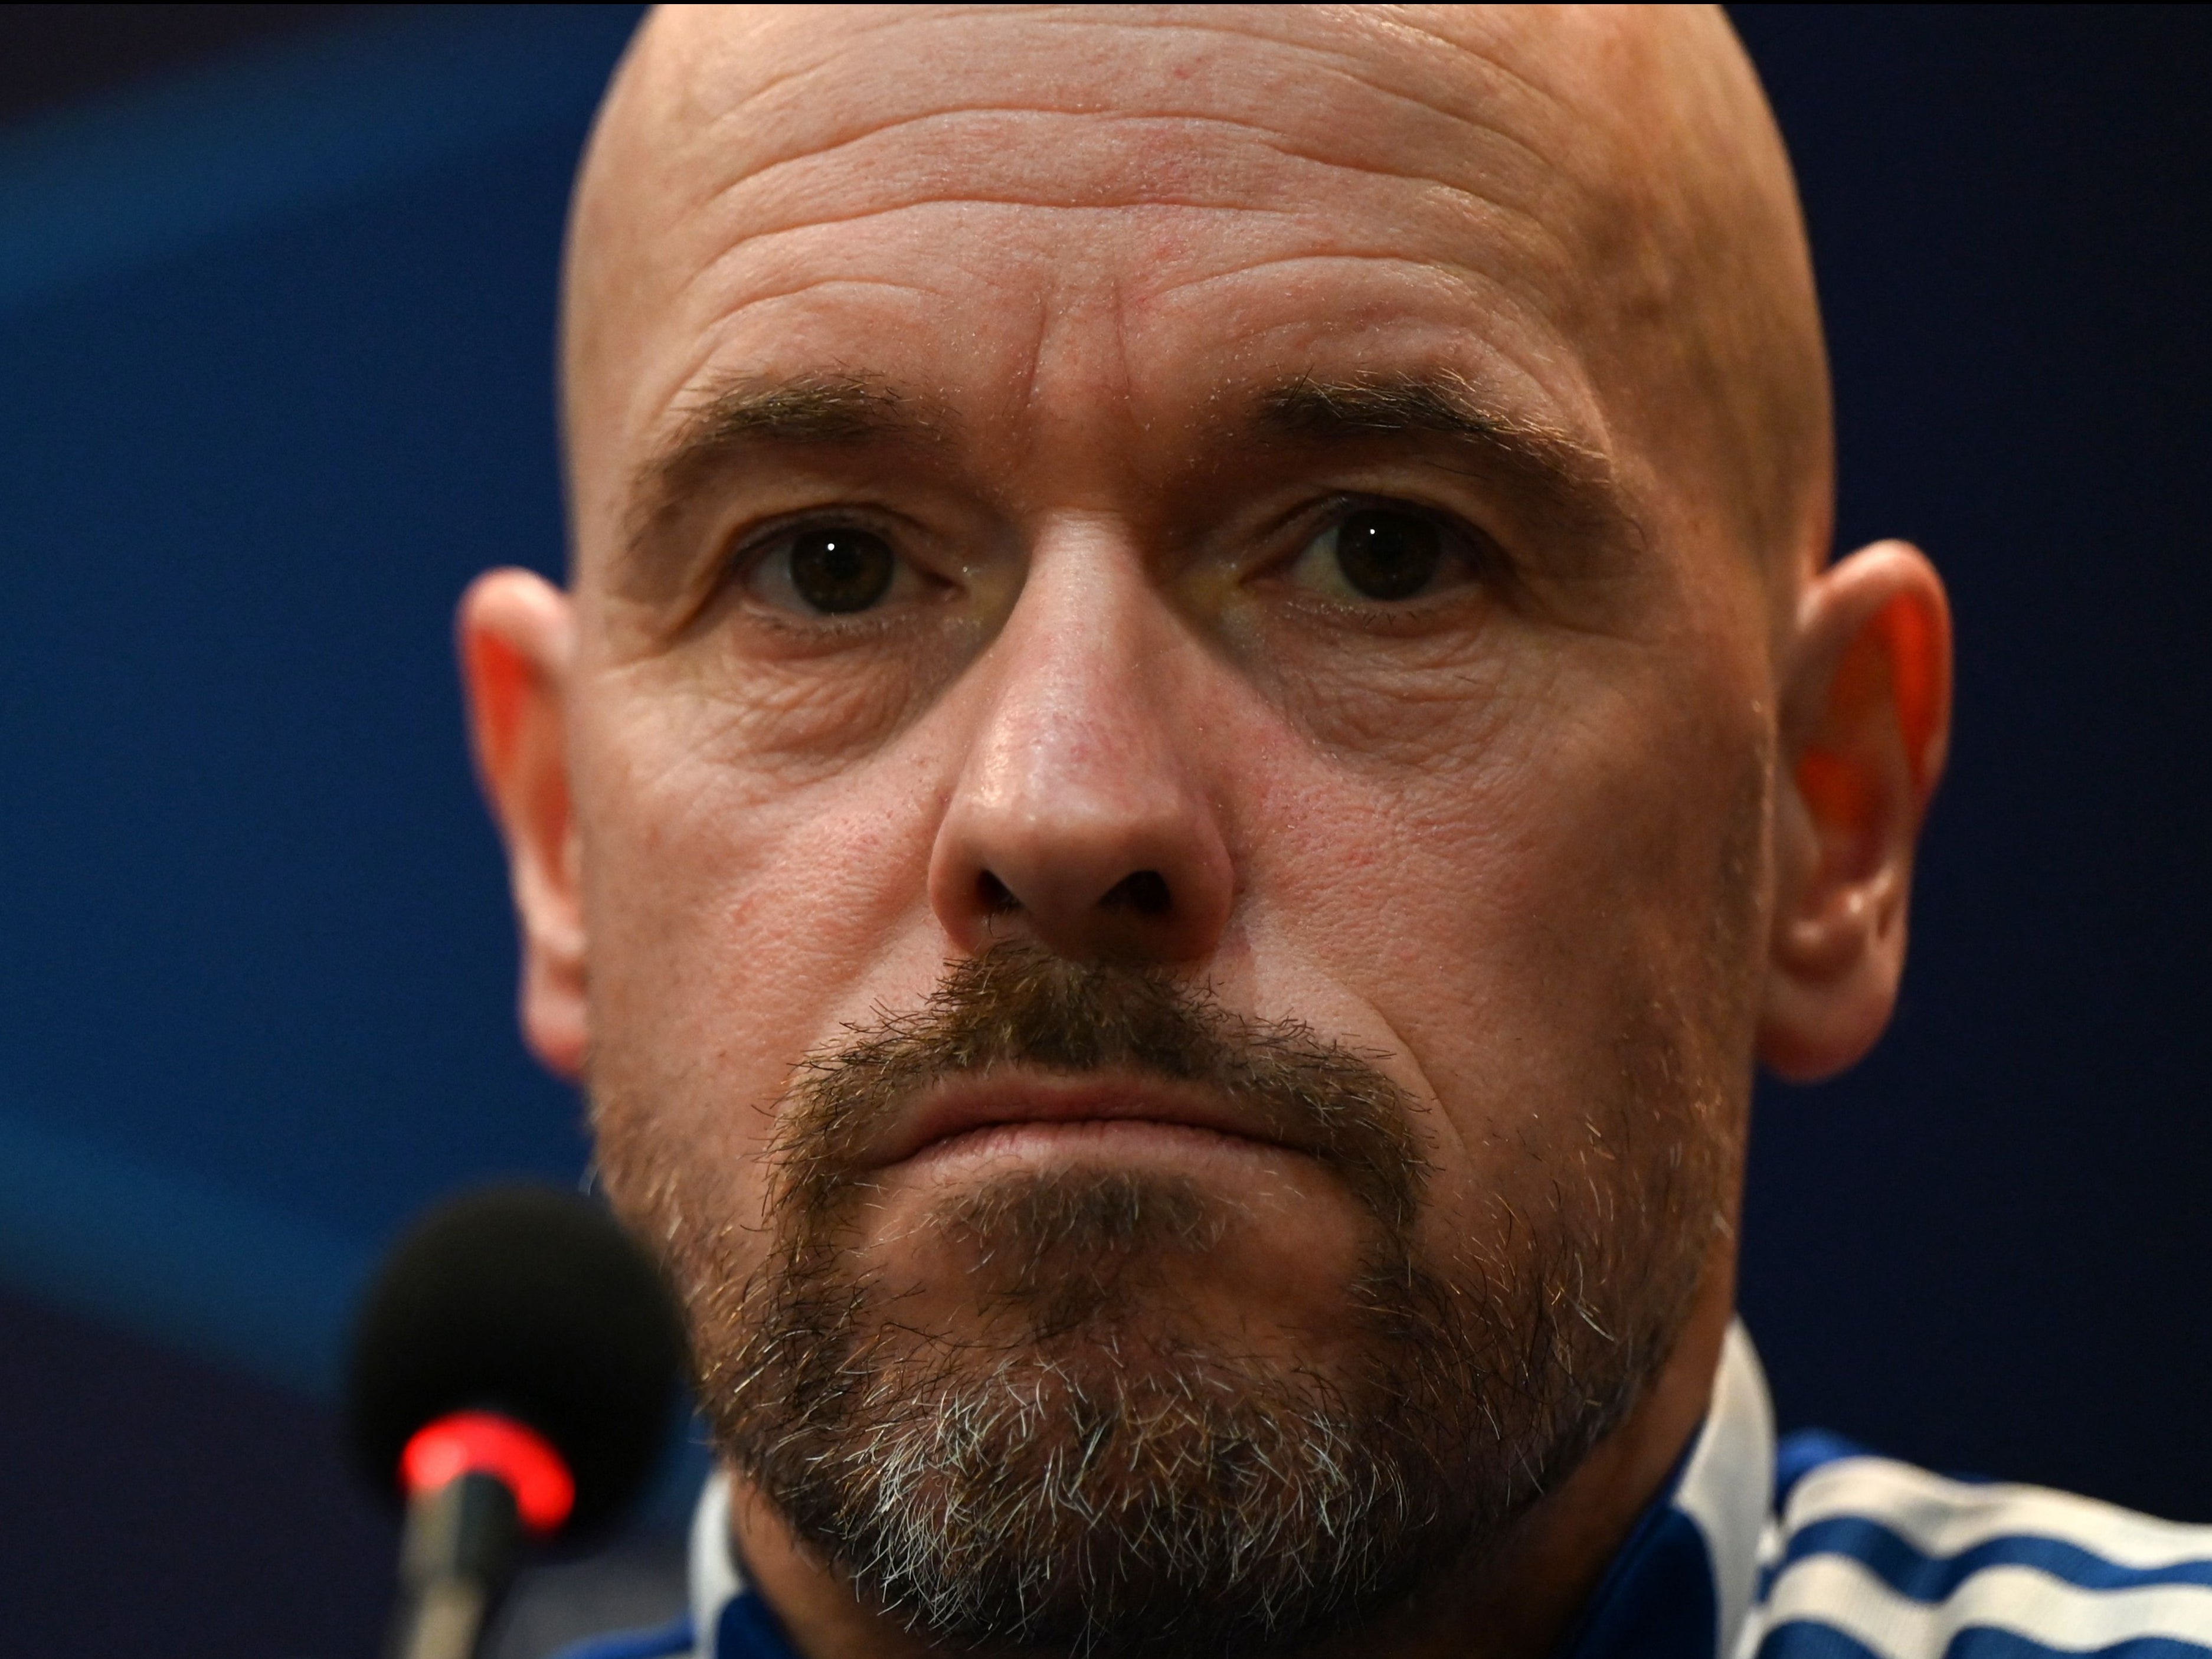 Manchester United have interviewed Ajax coach Erik ten Hag over the permanent manager’s job